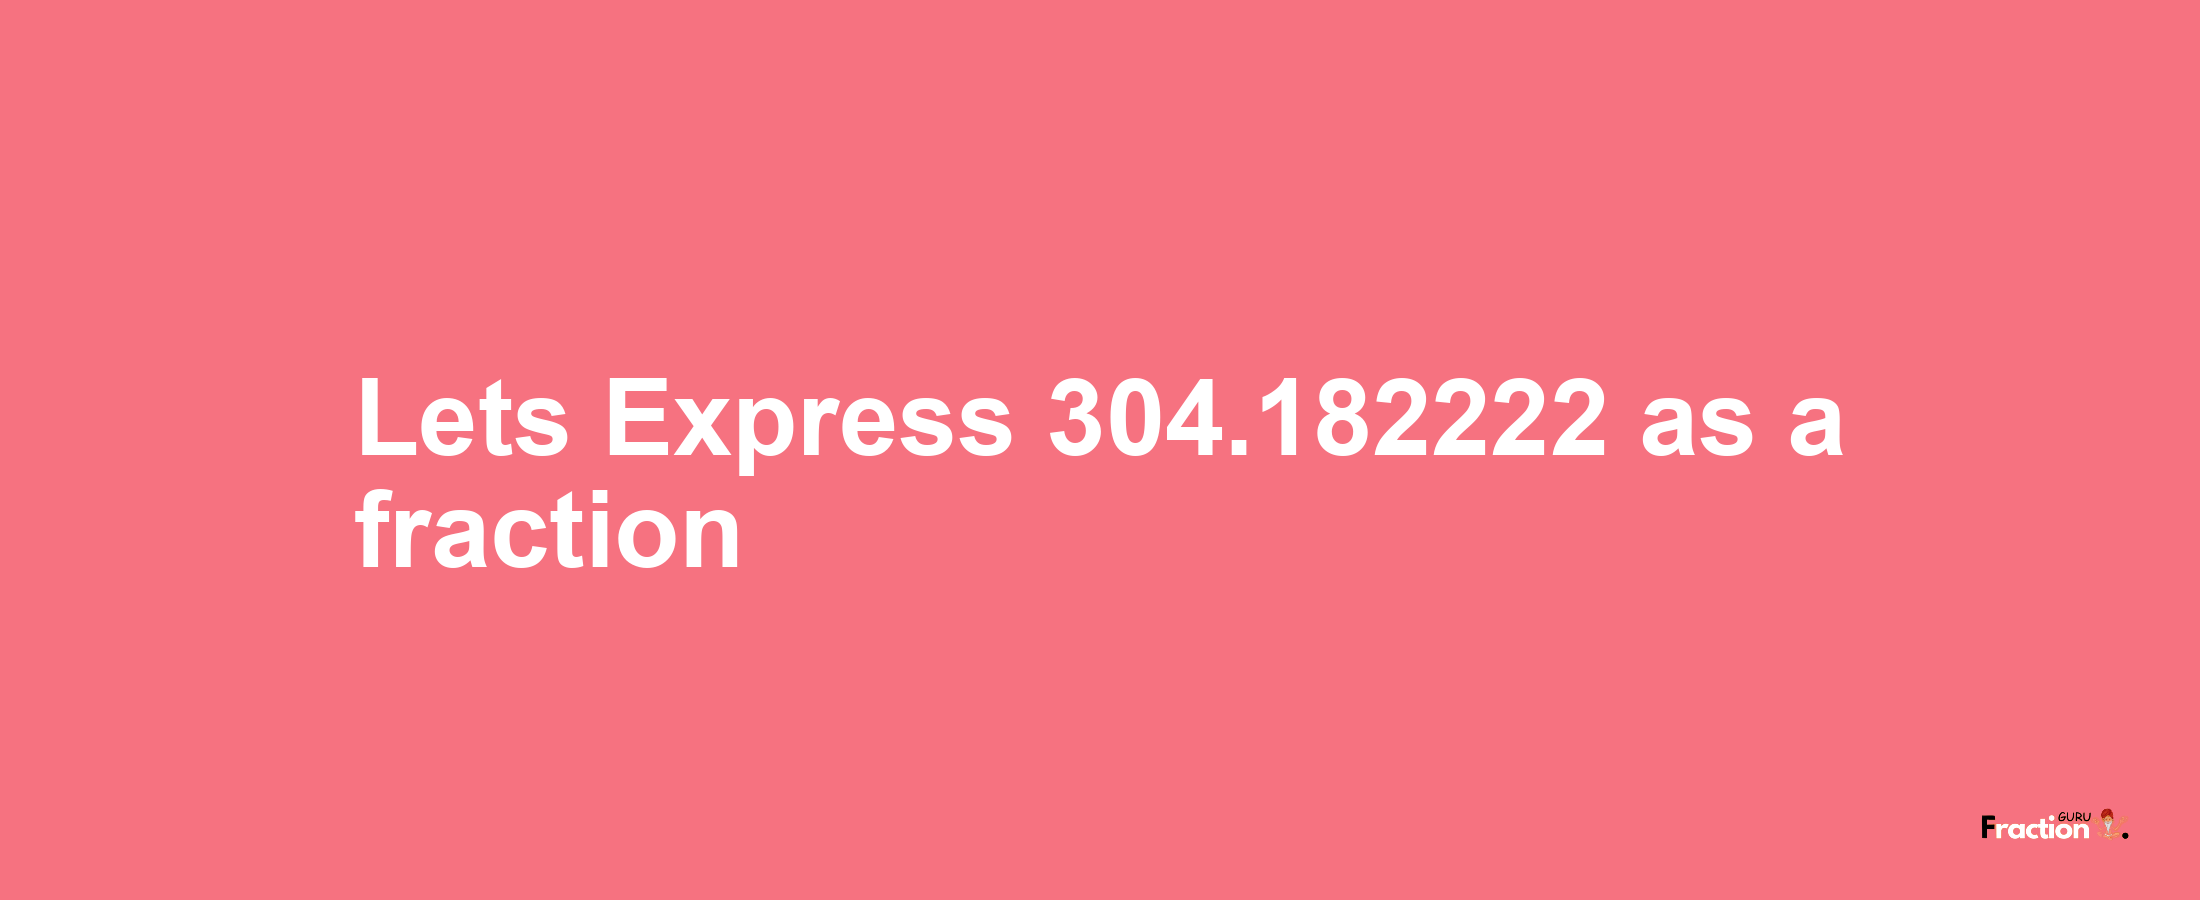 Lets Express 304.182222 as afraction